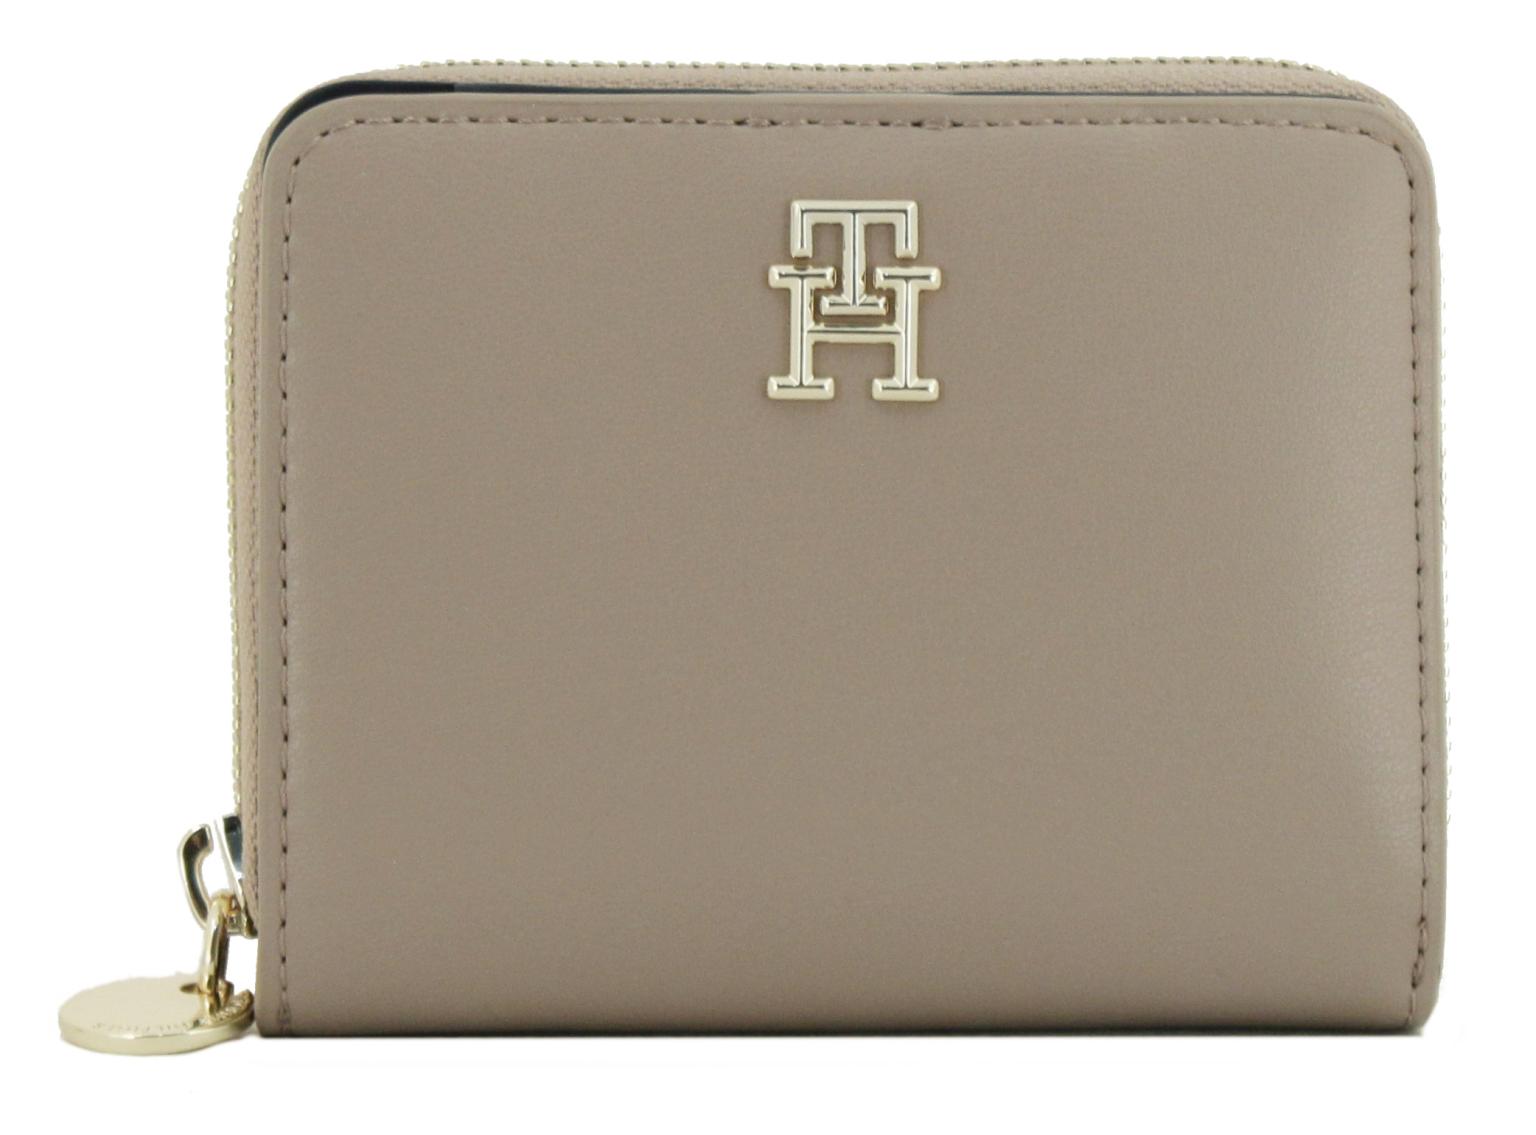 Tommy Hilfiger Klappbörse TH Chic Med Double Function beige taupe